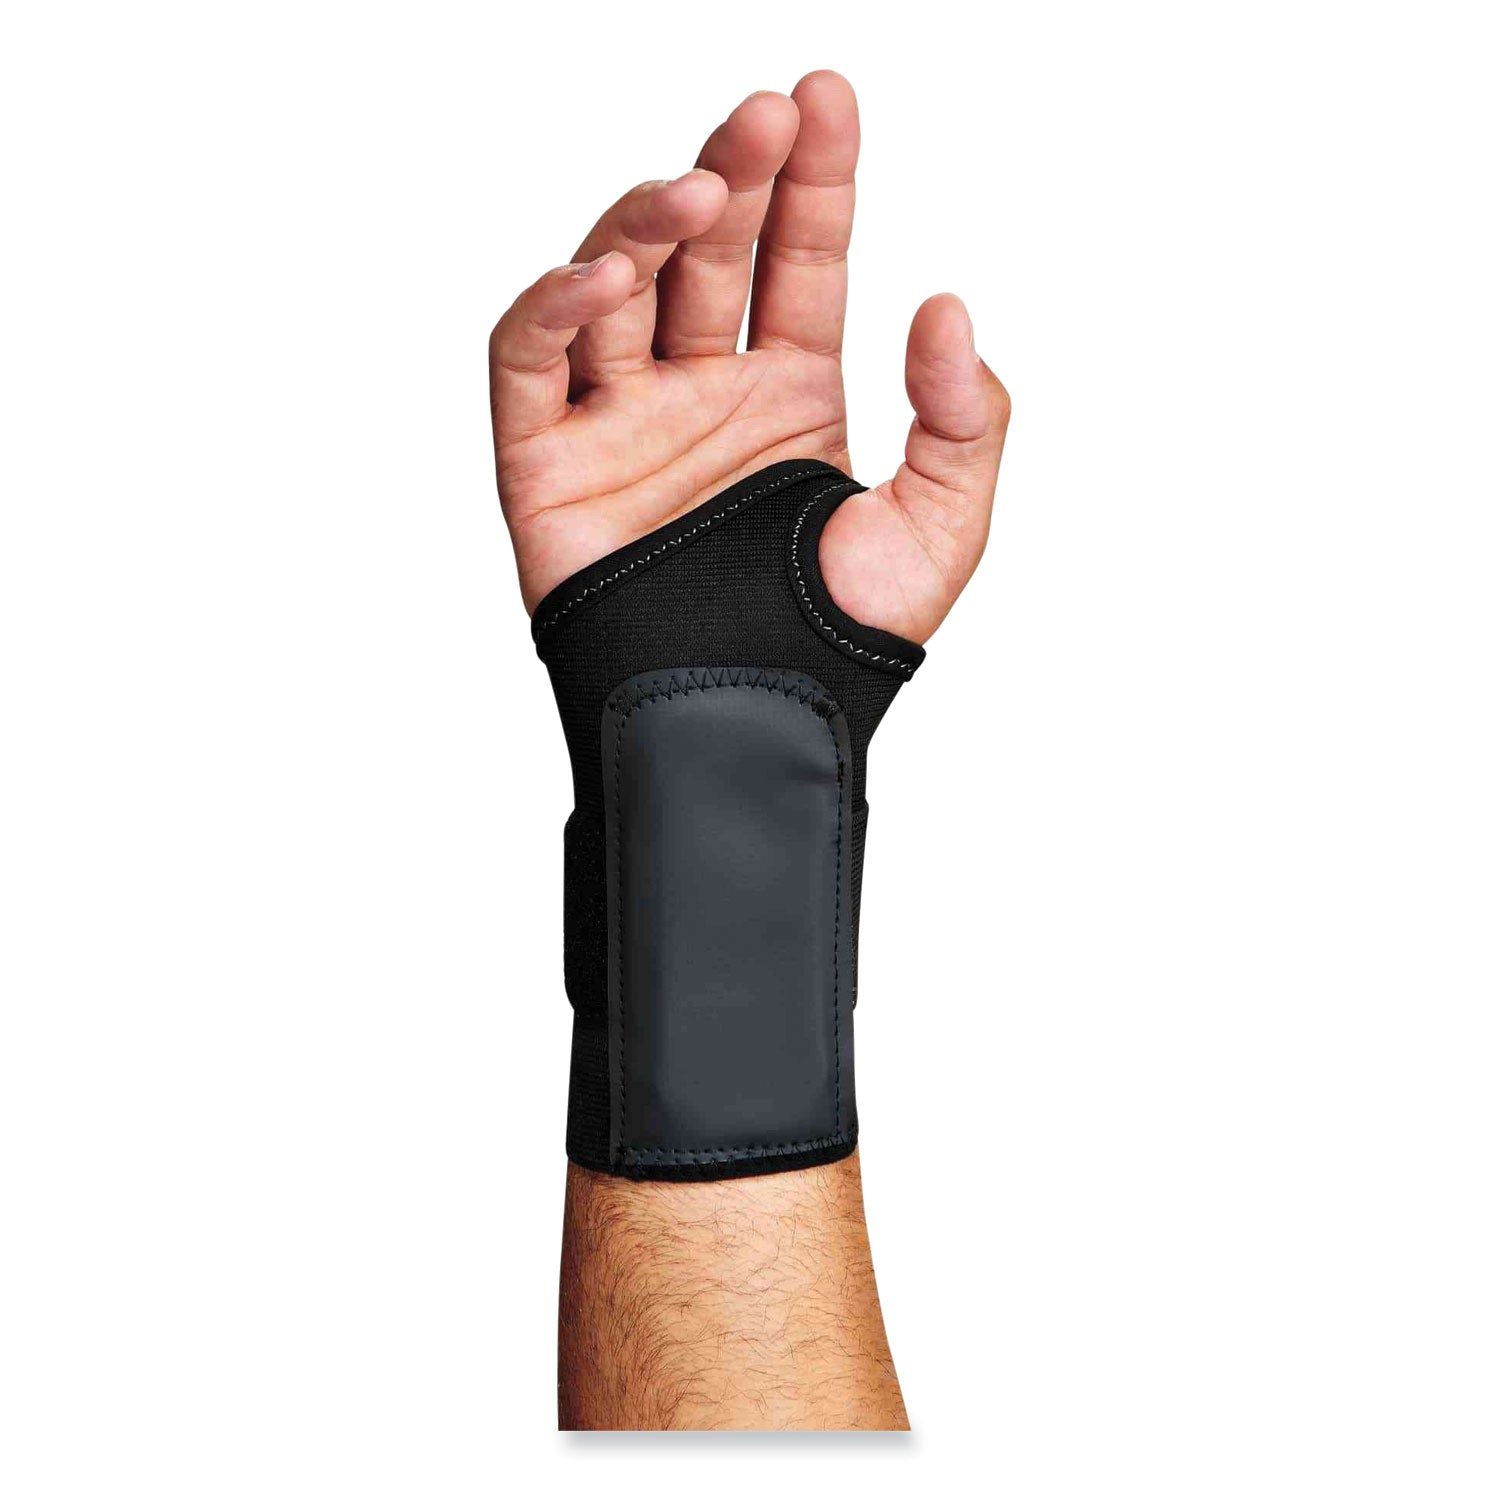 proflex-4000-single-strap-wrist-support-small-fits-right-hand-black-ships-in-1-3-business-days_ego70002 - 4